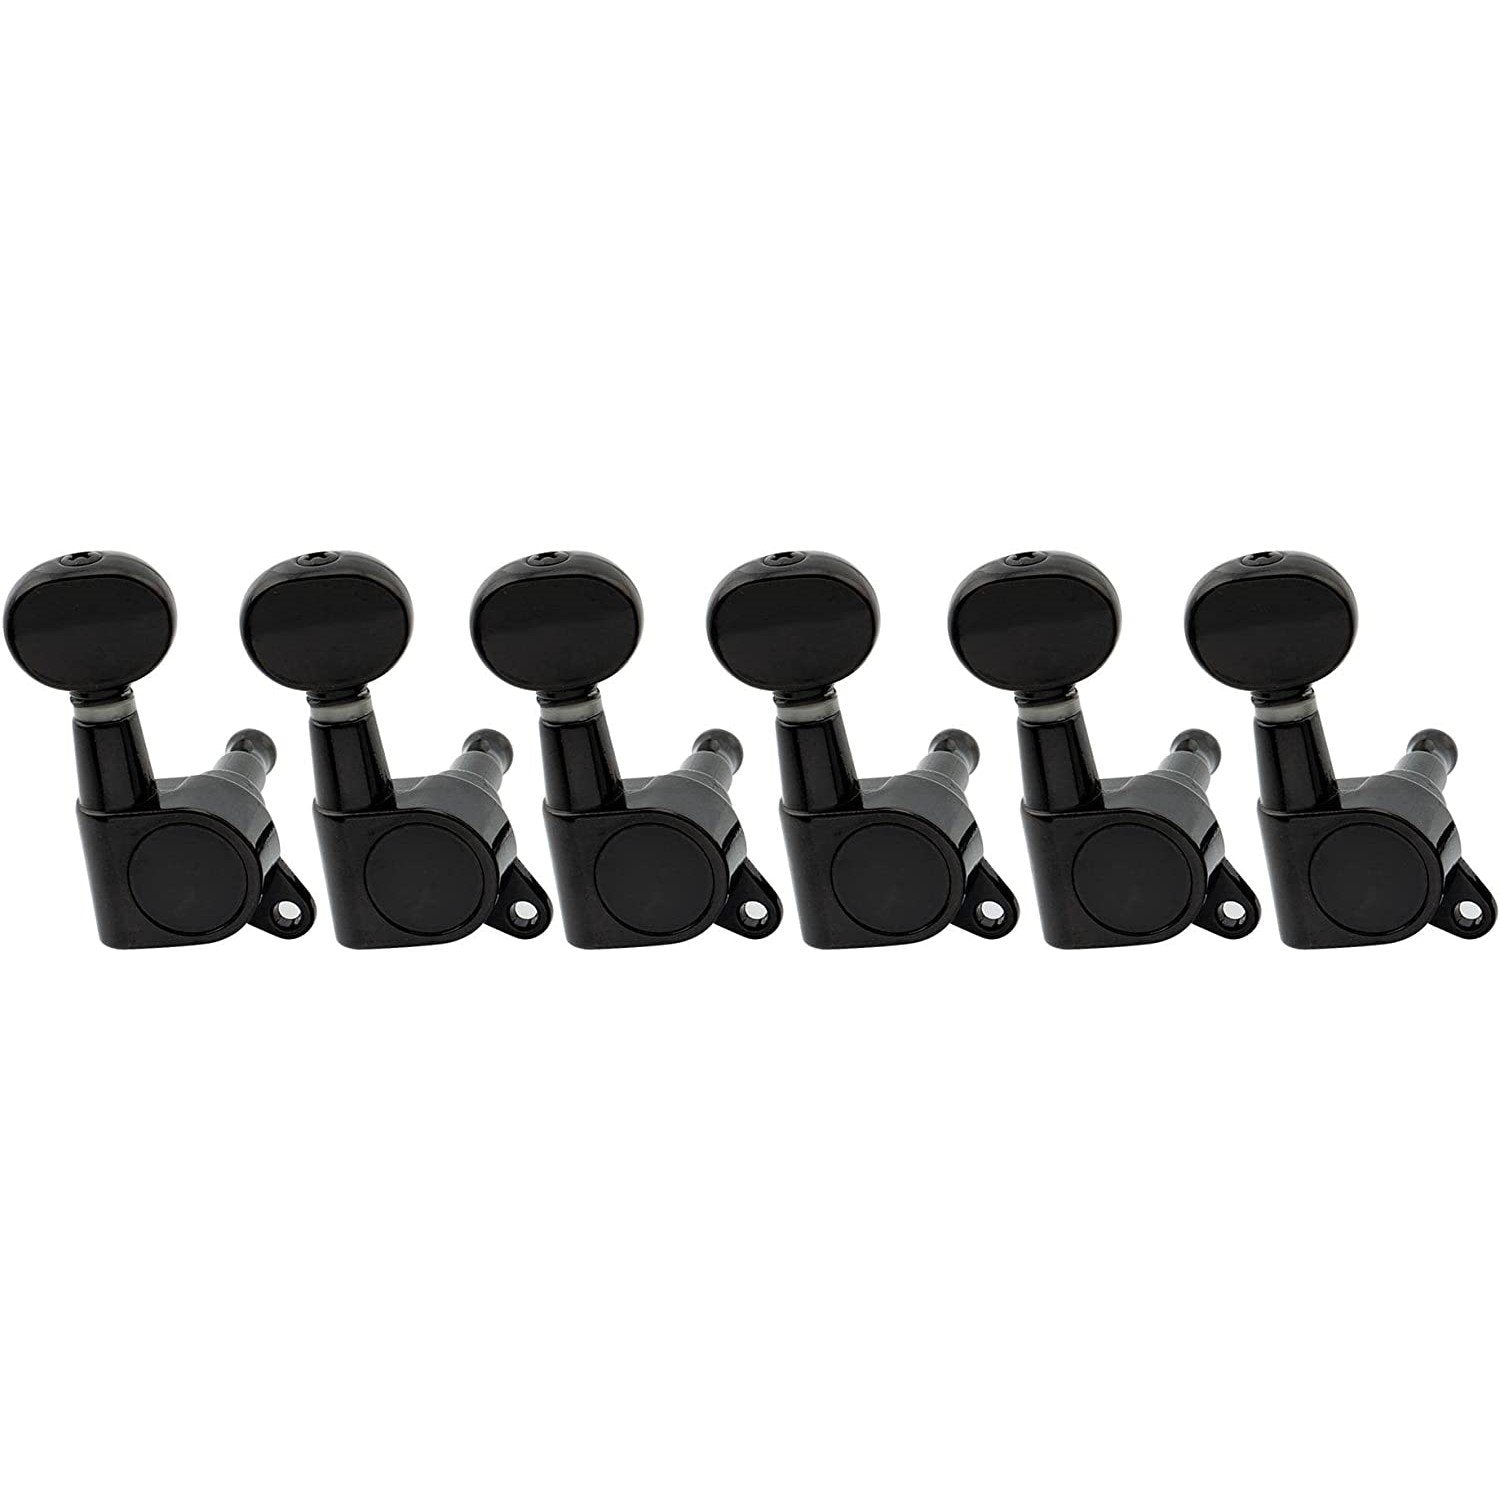 6-In-Line Right Hand Guitar Tuning Pegs, Black